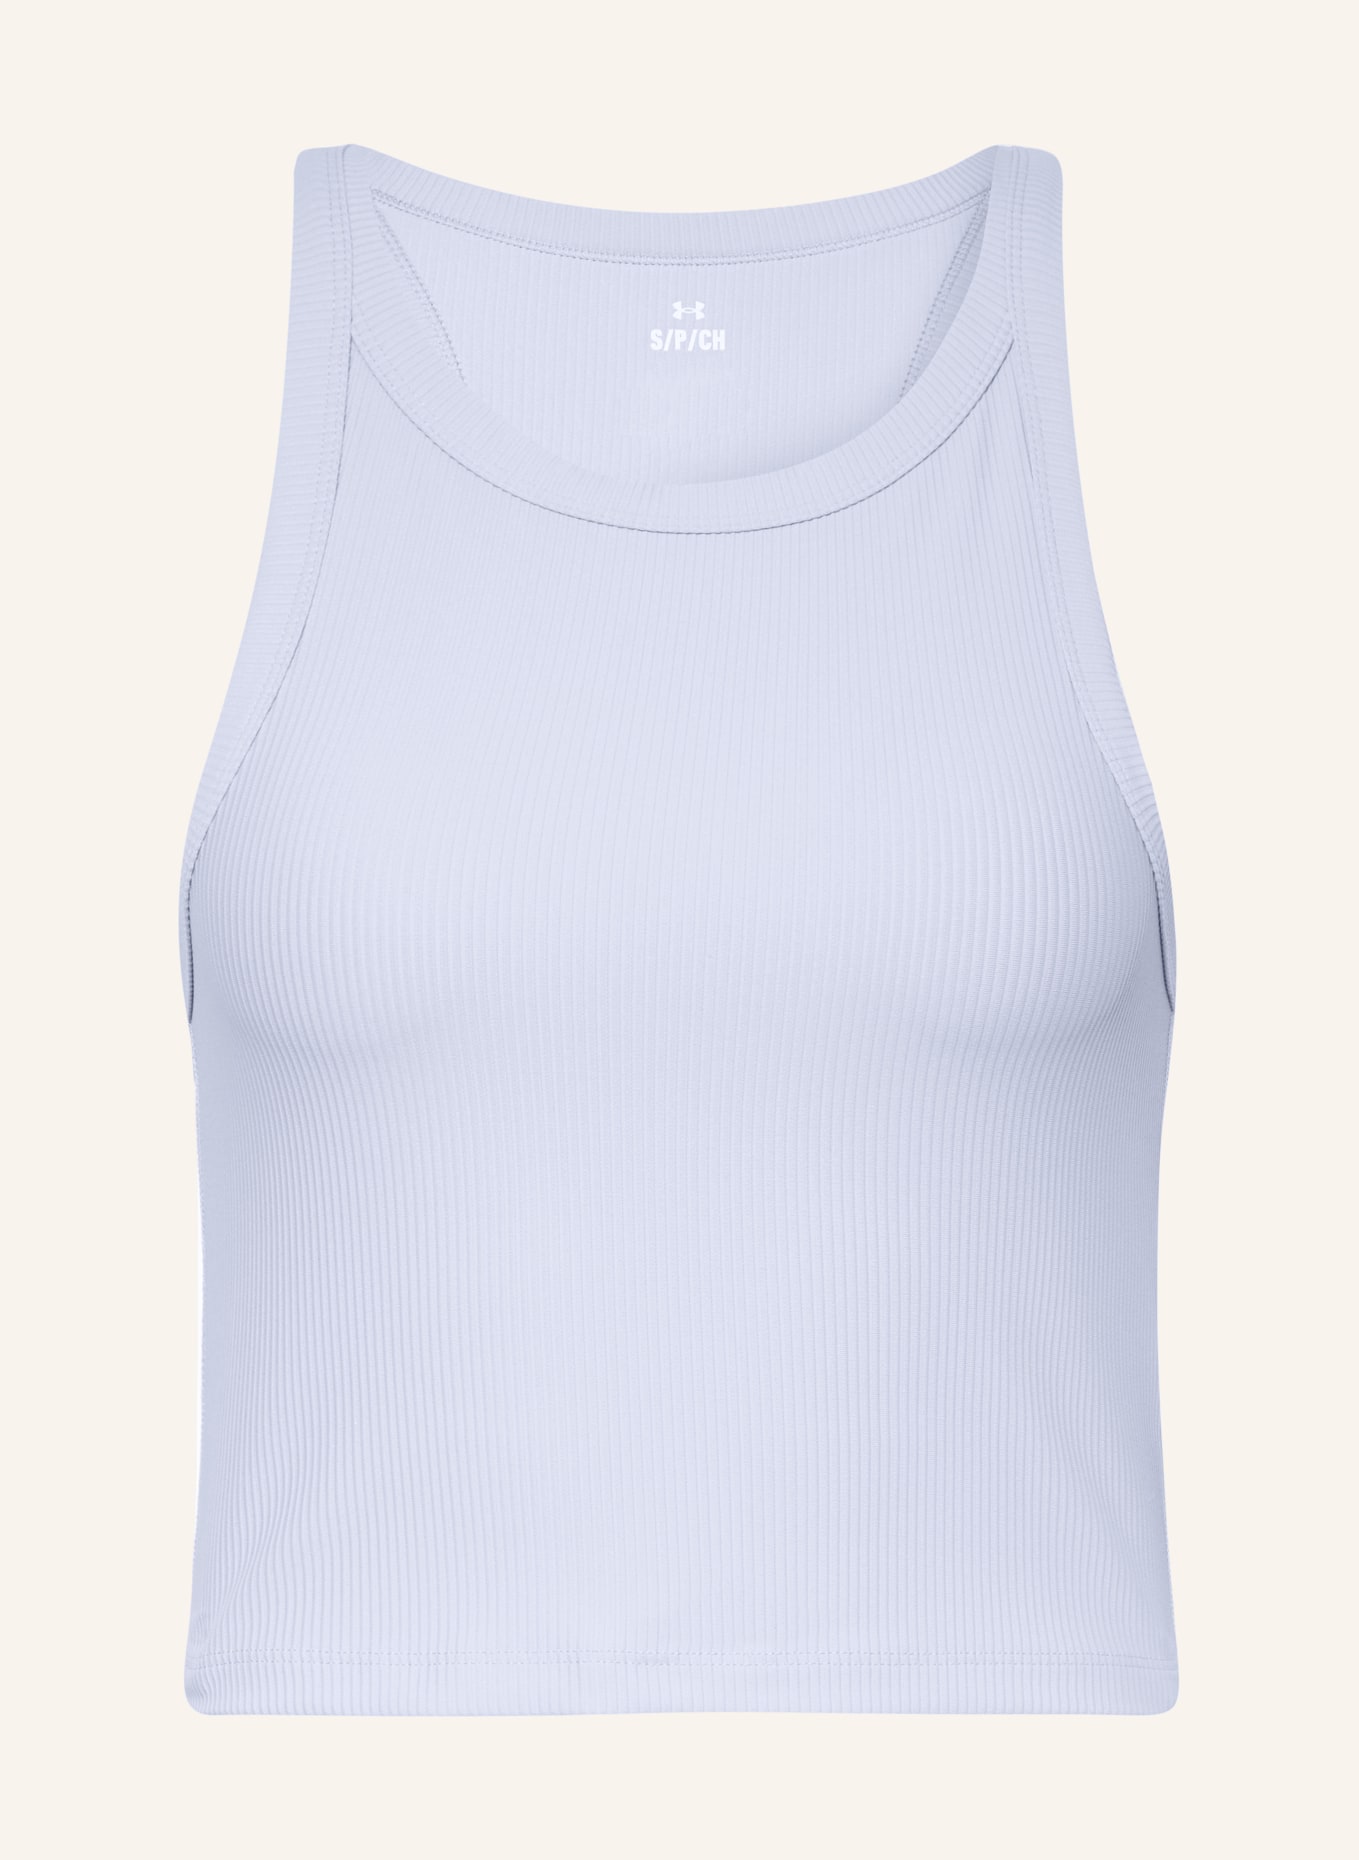 UNDER ARMOUR Cropped top MERIDIAN, Color: LIGHT BLUE (Image 1)